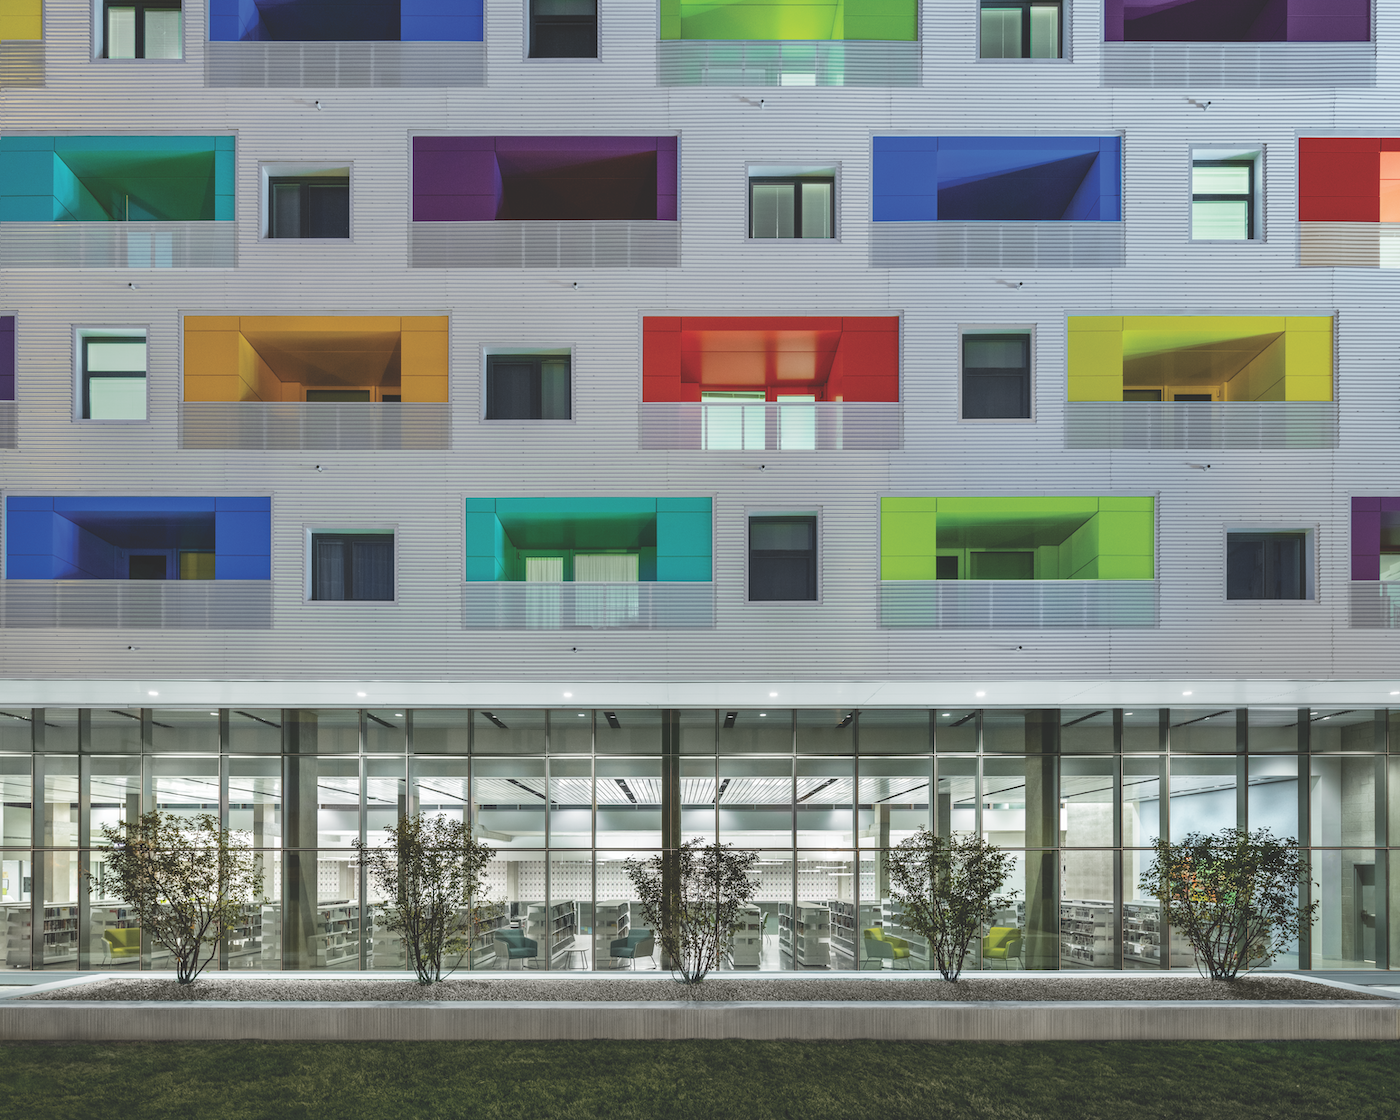 The colorful balconies of a building set into a gray facade over a view into a library underneath